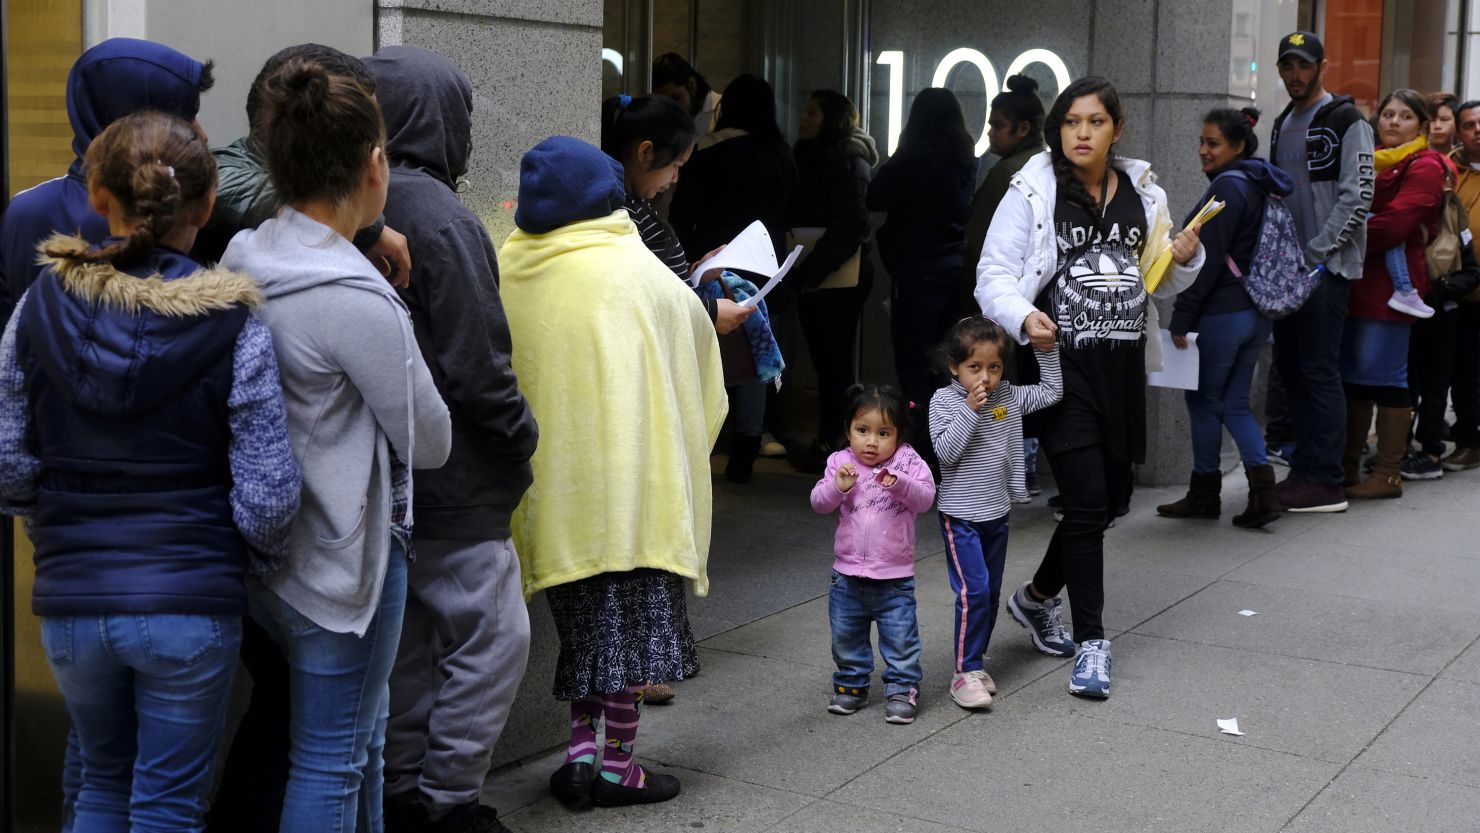 Hundreds of people overflow onto the sidewalk in a line snaking around the block outside a U.S. immigration office with numerous courtrooms Thursday, Jan. 31, 2019, in San Francisco. (AP Photo/Eric Risberg)